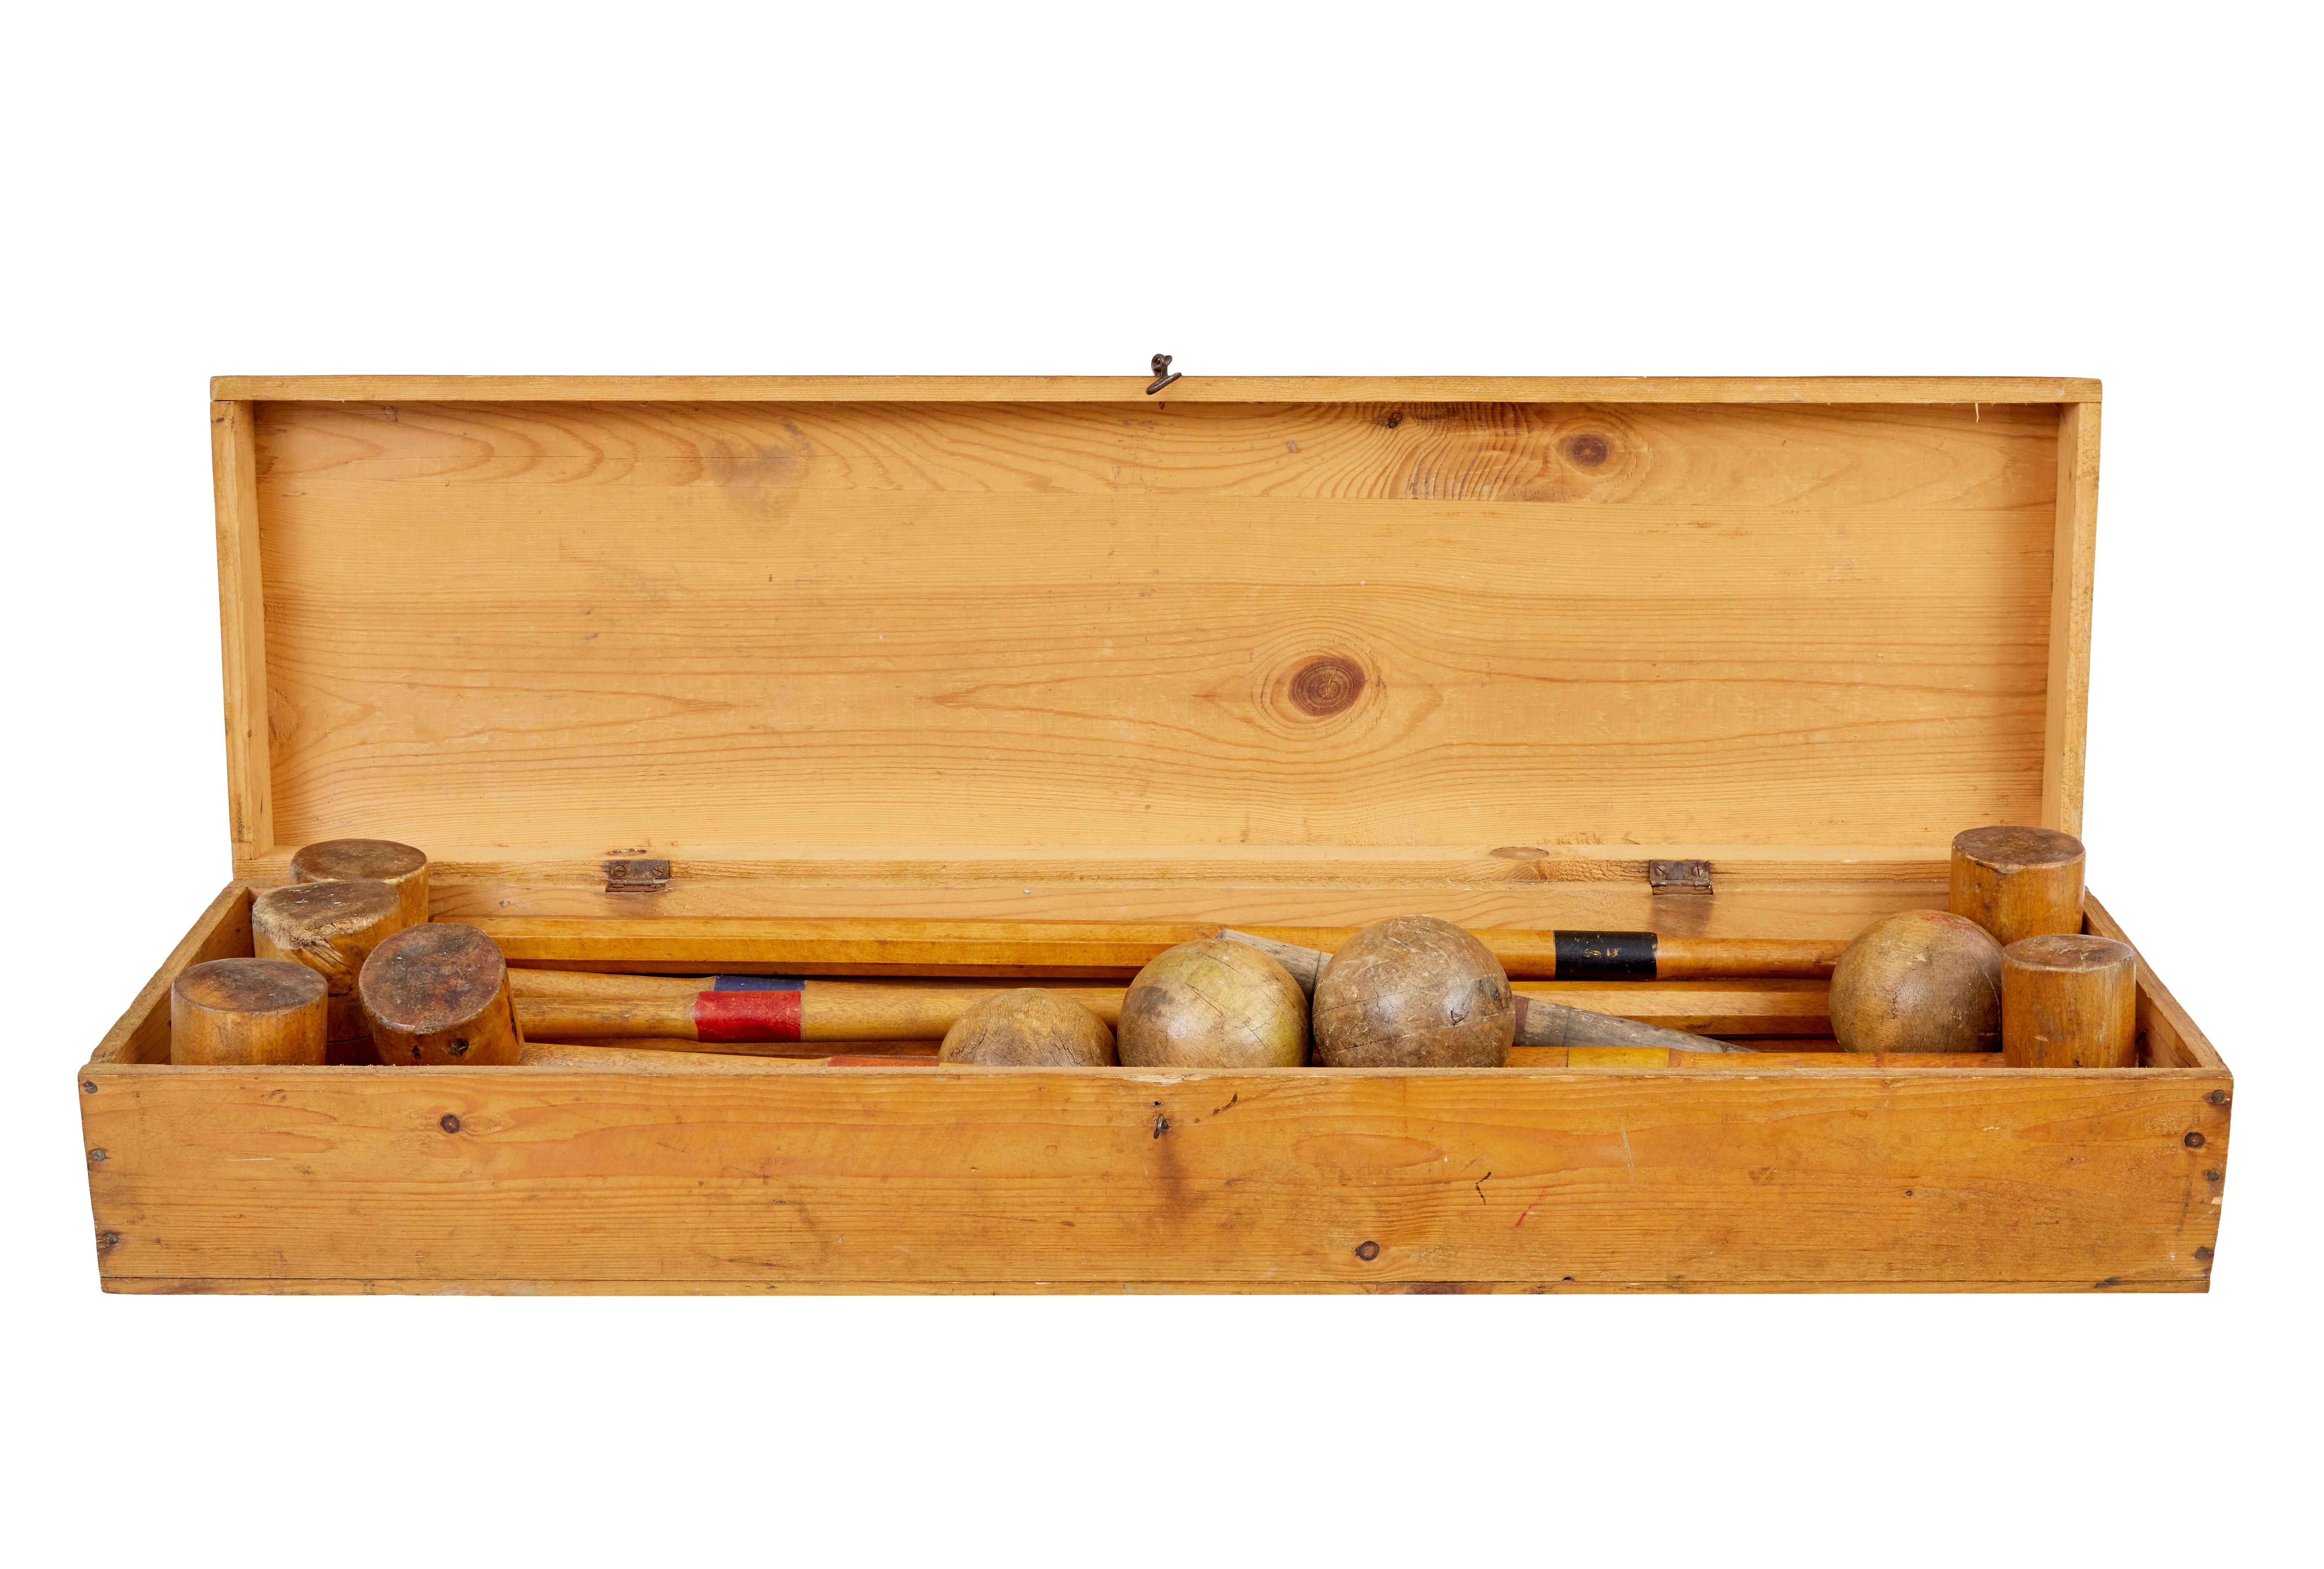 English 20th century croquet set in pine box For Sale